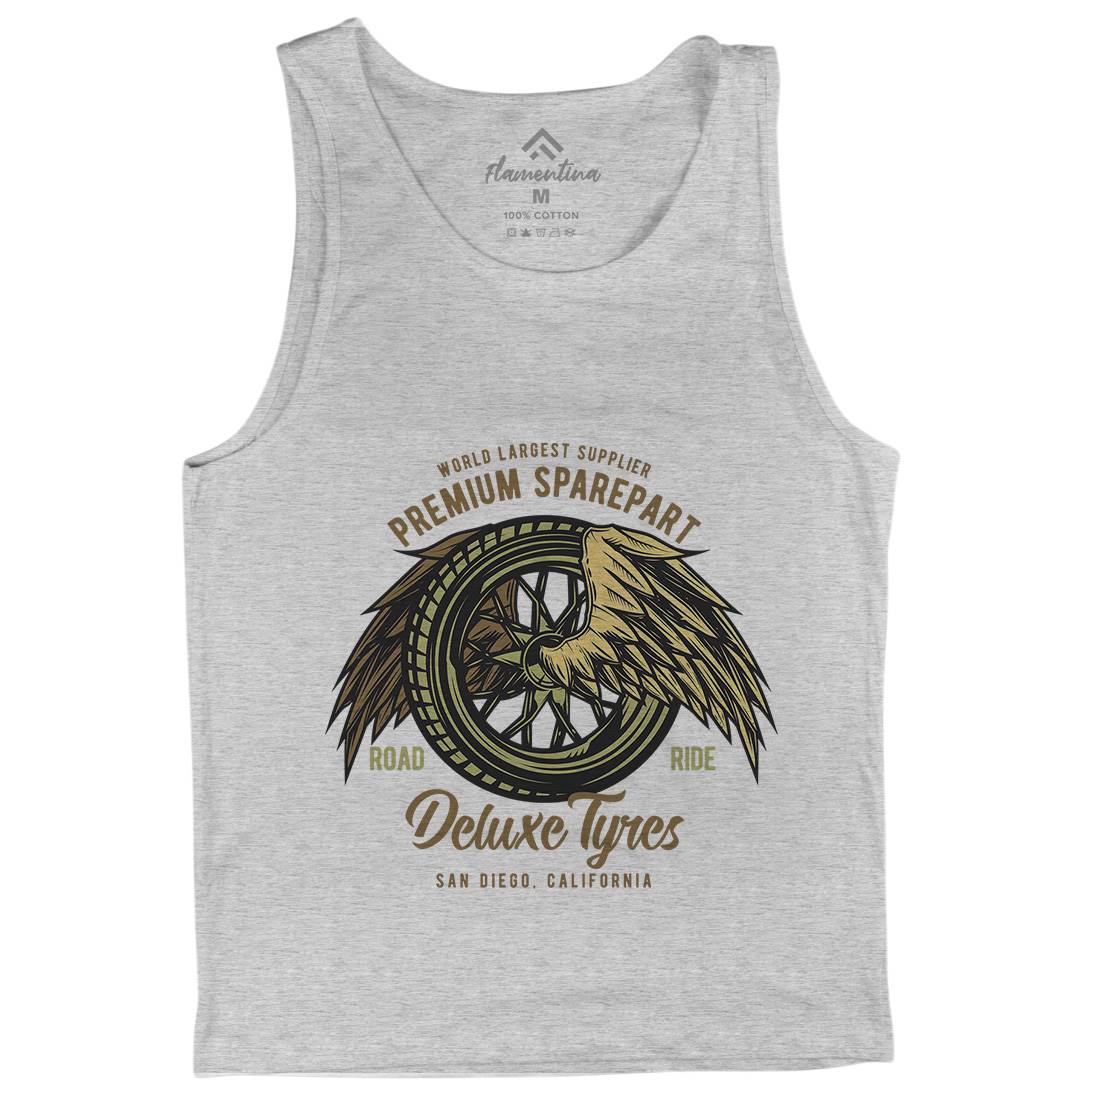 Deluxe Tyres Muscle Car Mens Tank Top Vest Cars B866